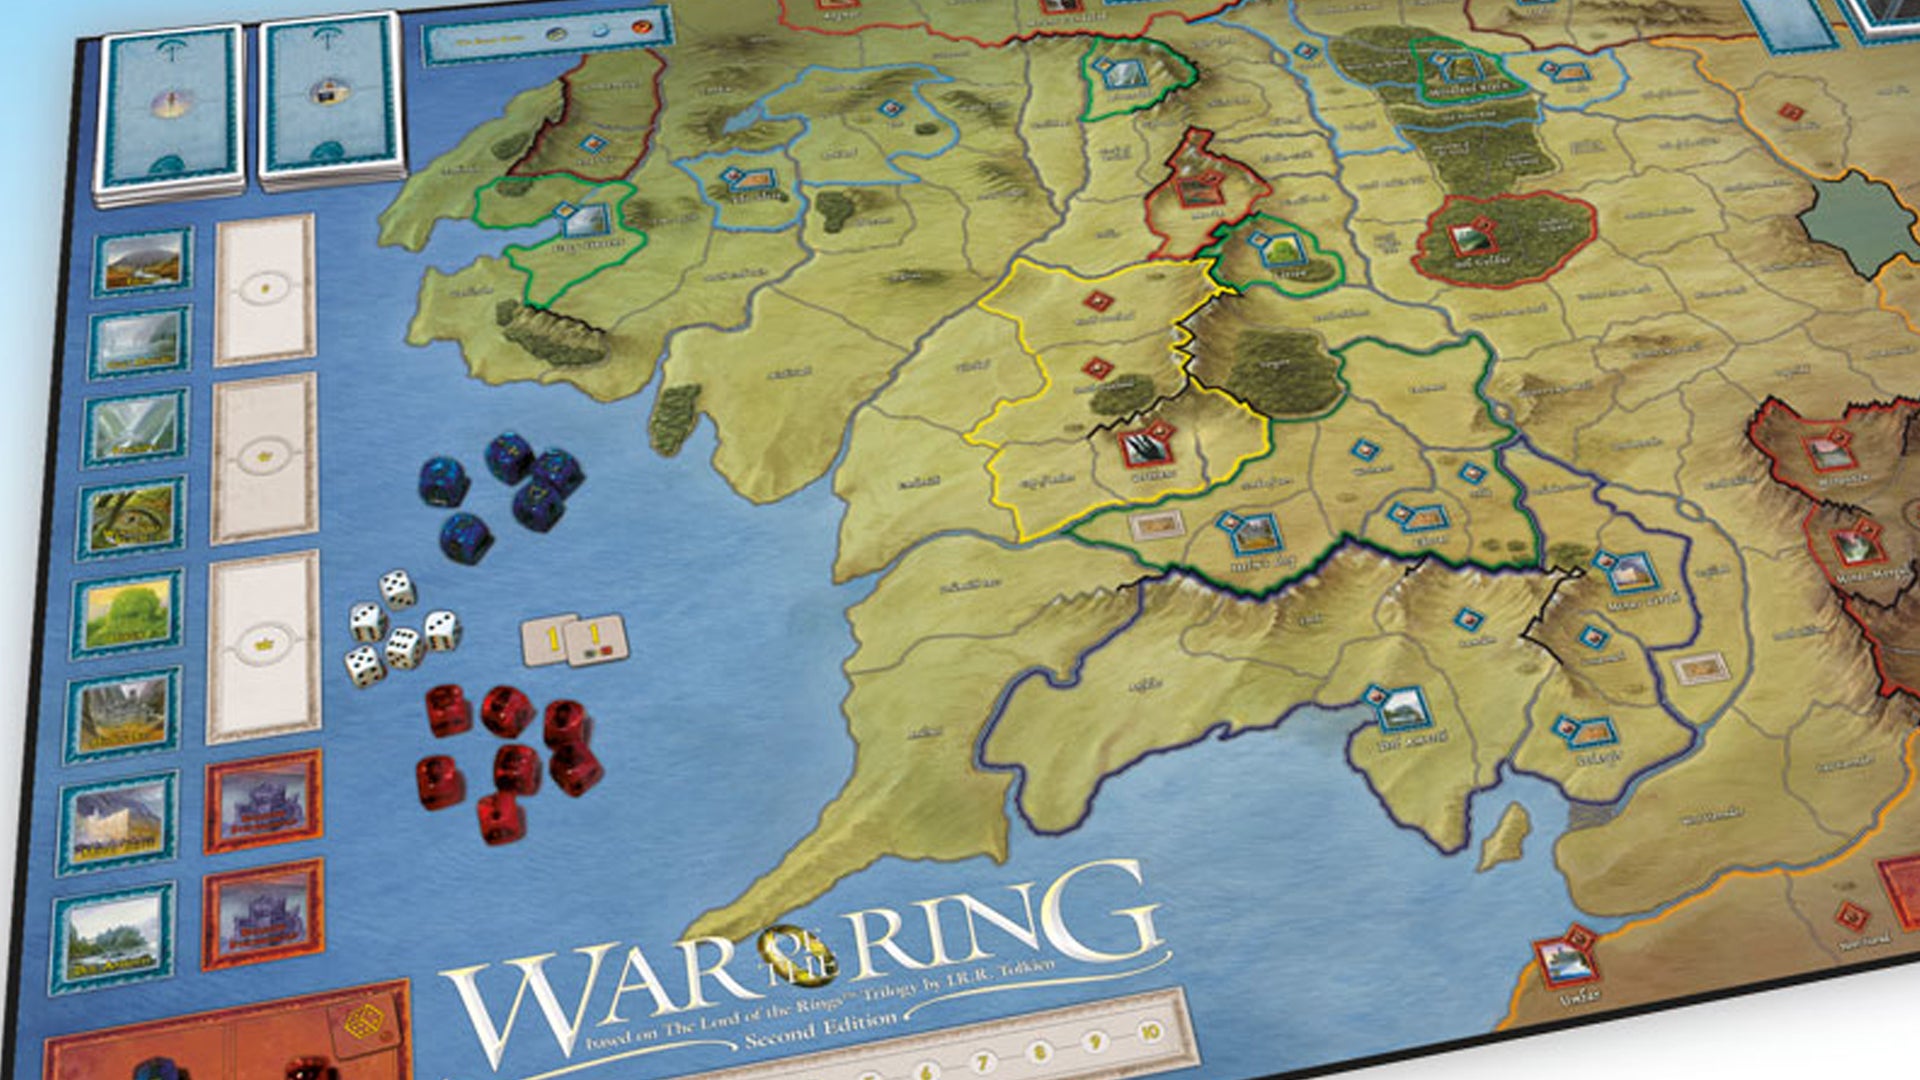 Image for War of the Ring: The Card Game and Hunt for the Ring expansion delayed to late 2022, studio behind Lord of the Rings games confirms